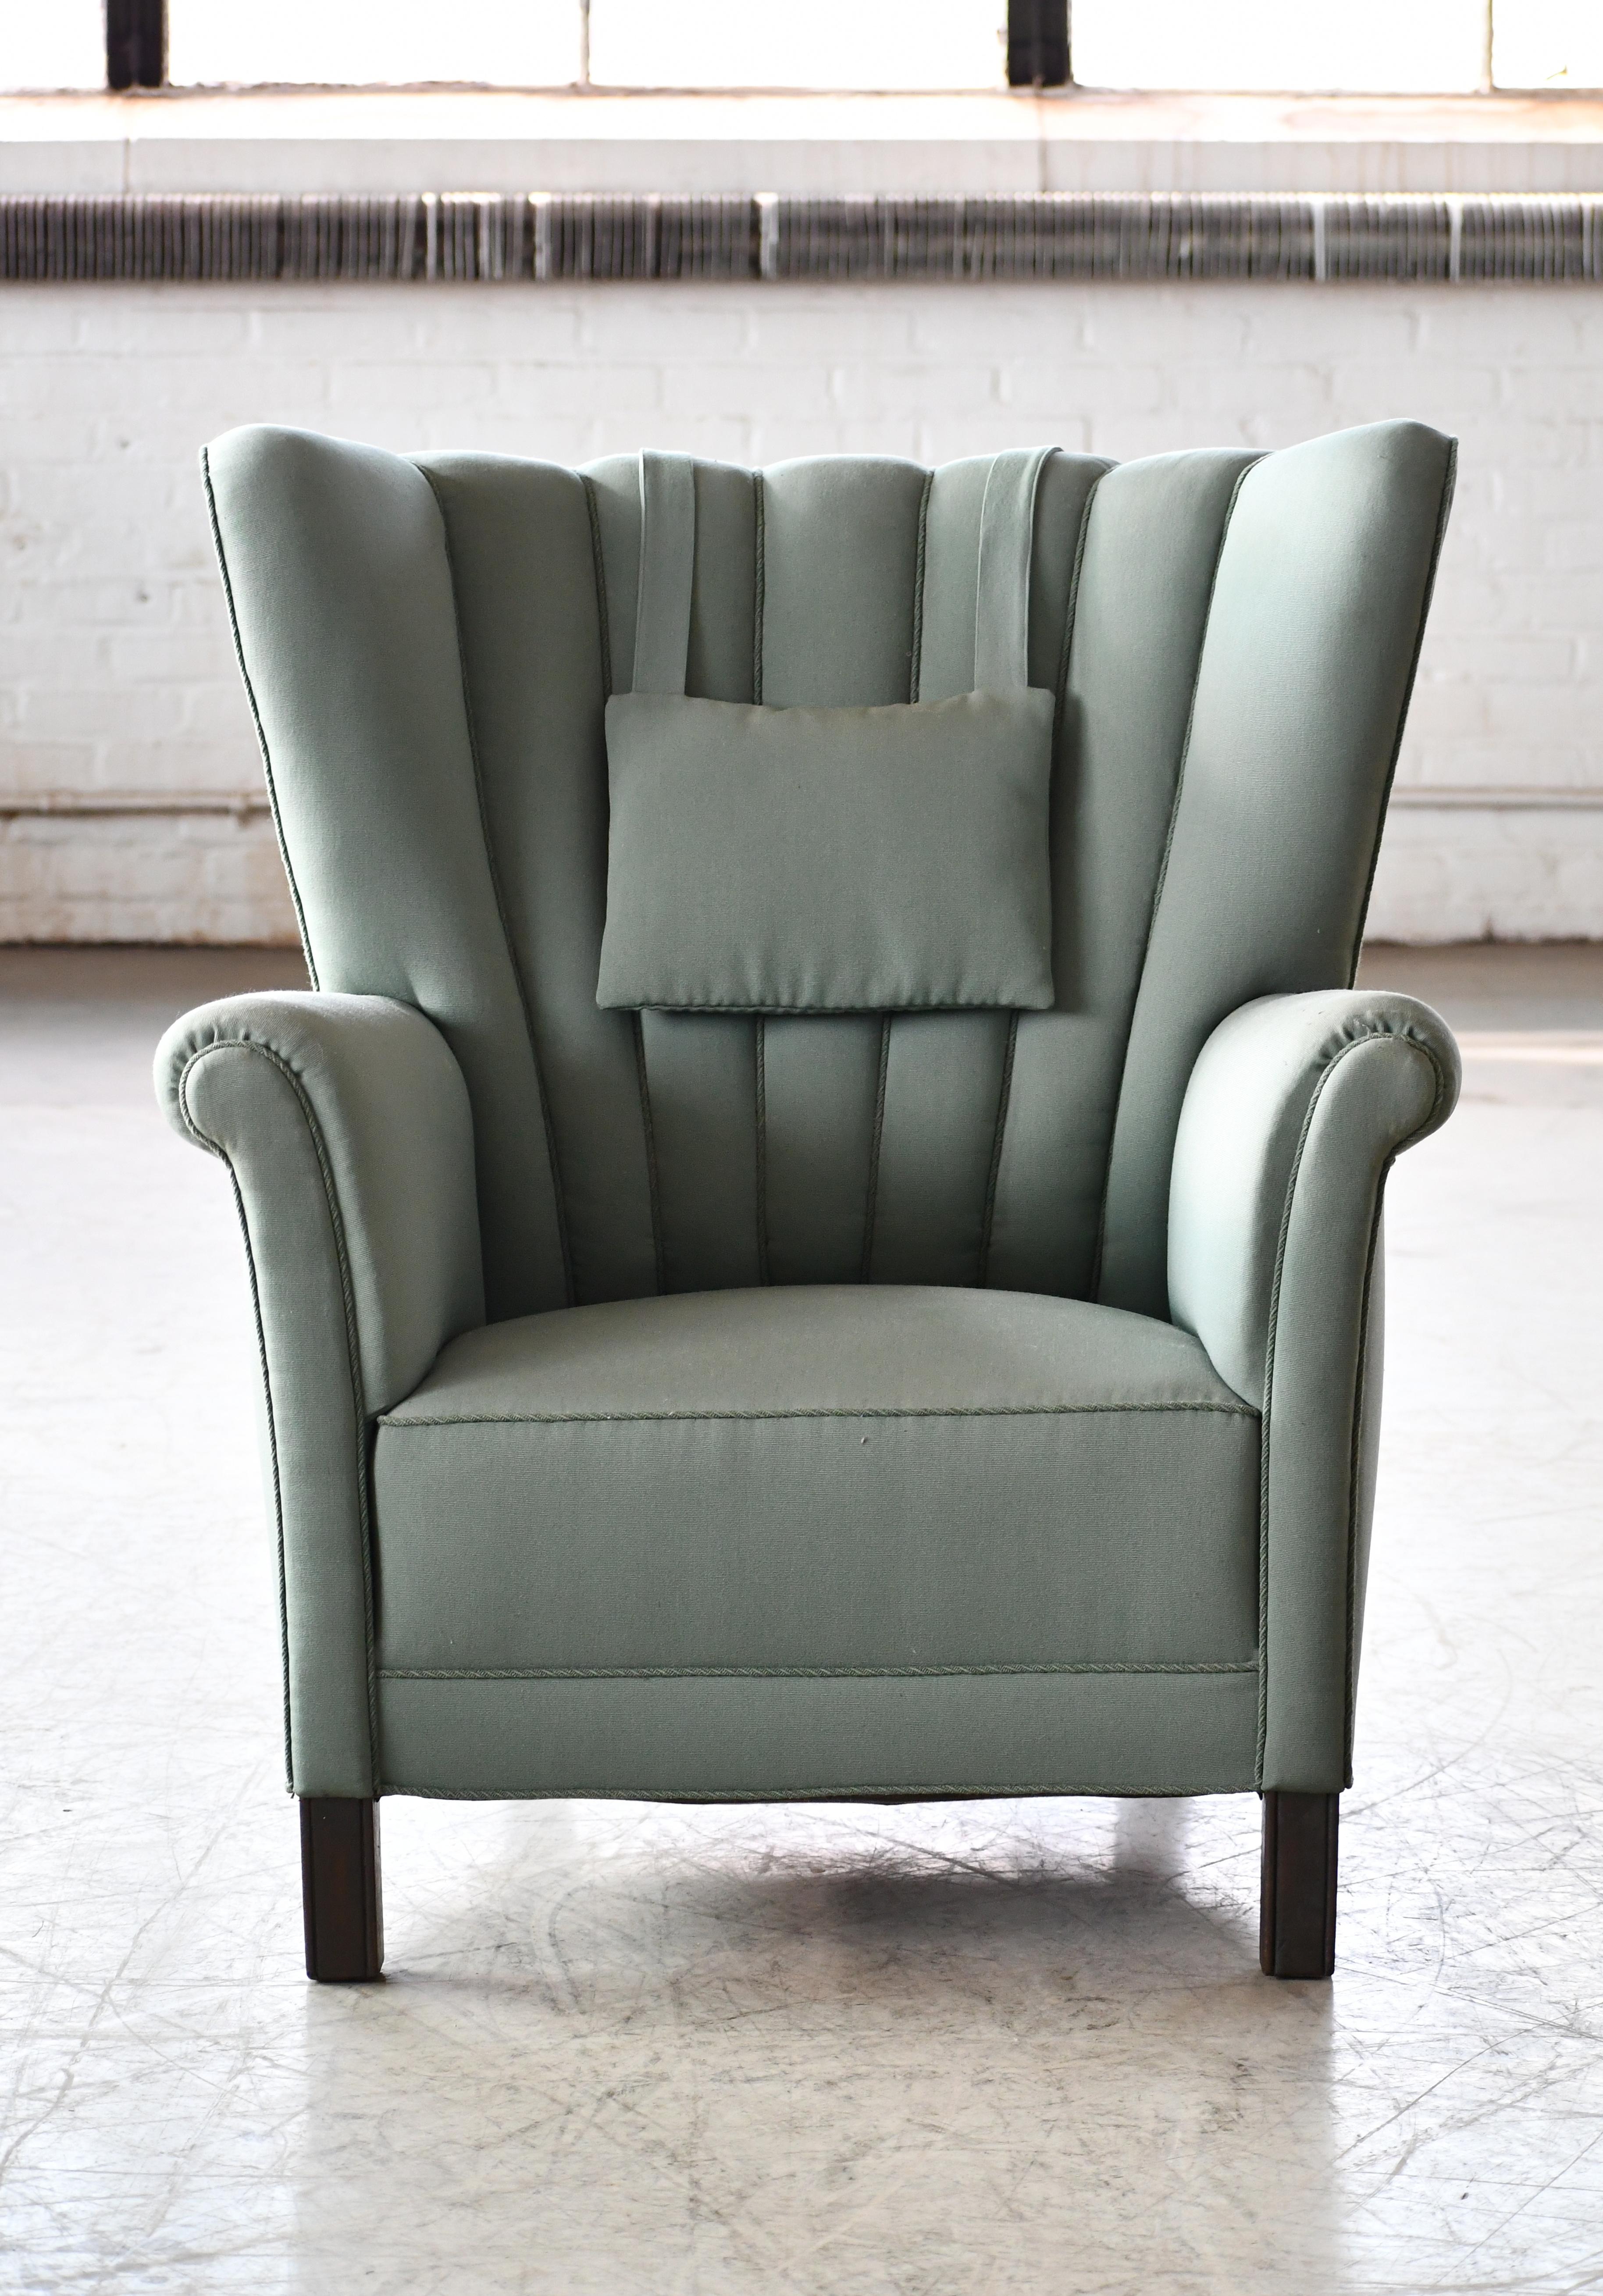 Danish 1950's Channelback Club Chair Attributed to Fritz Hansen  For Sale 1